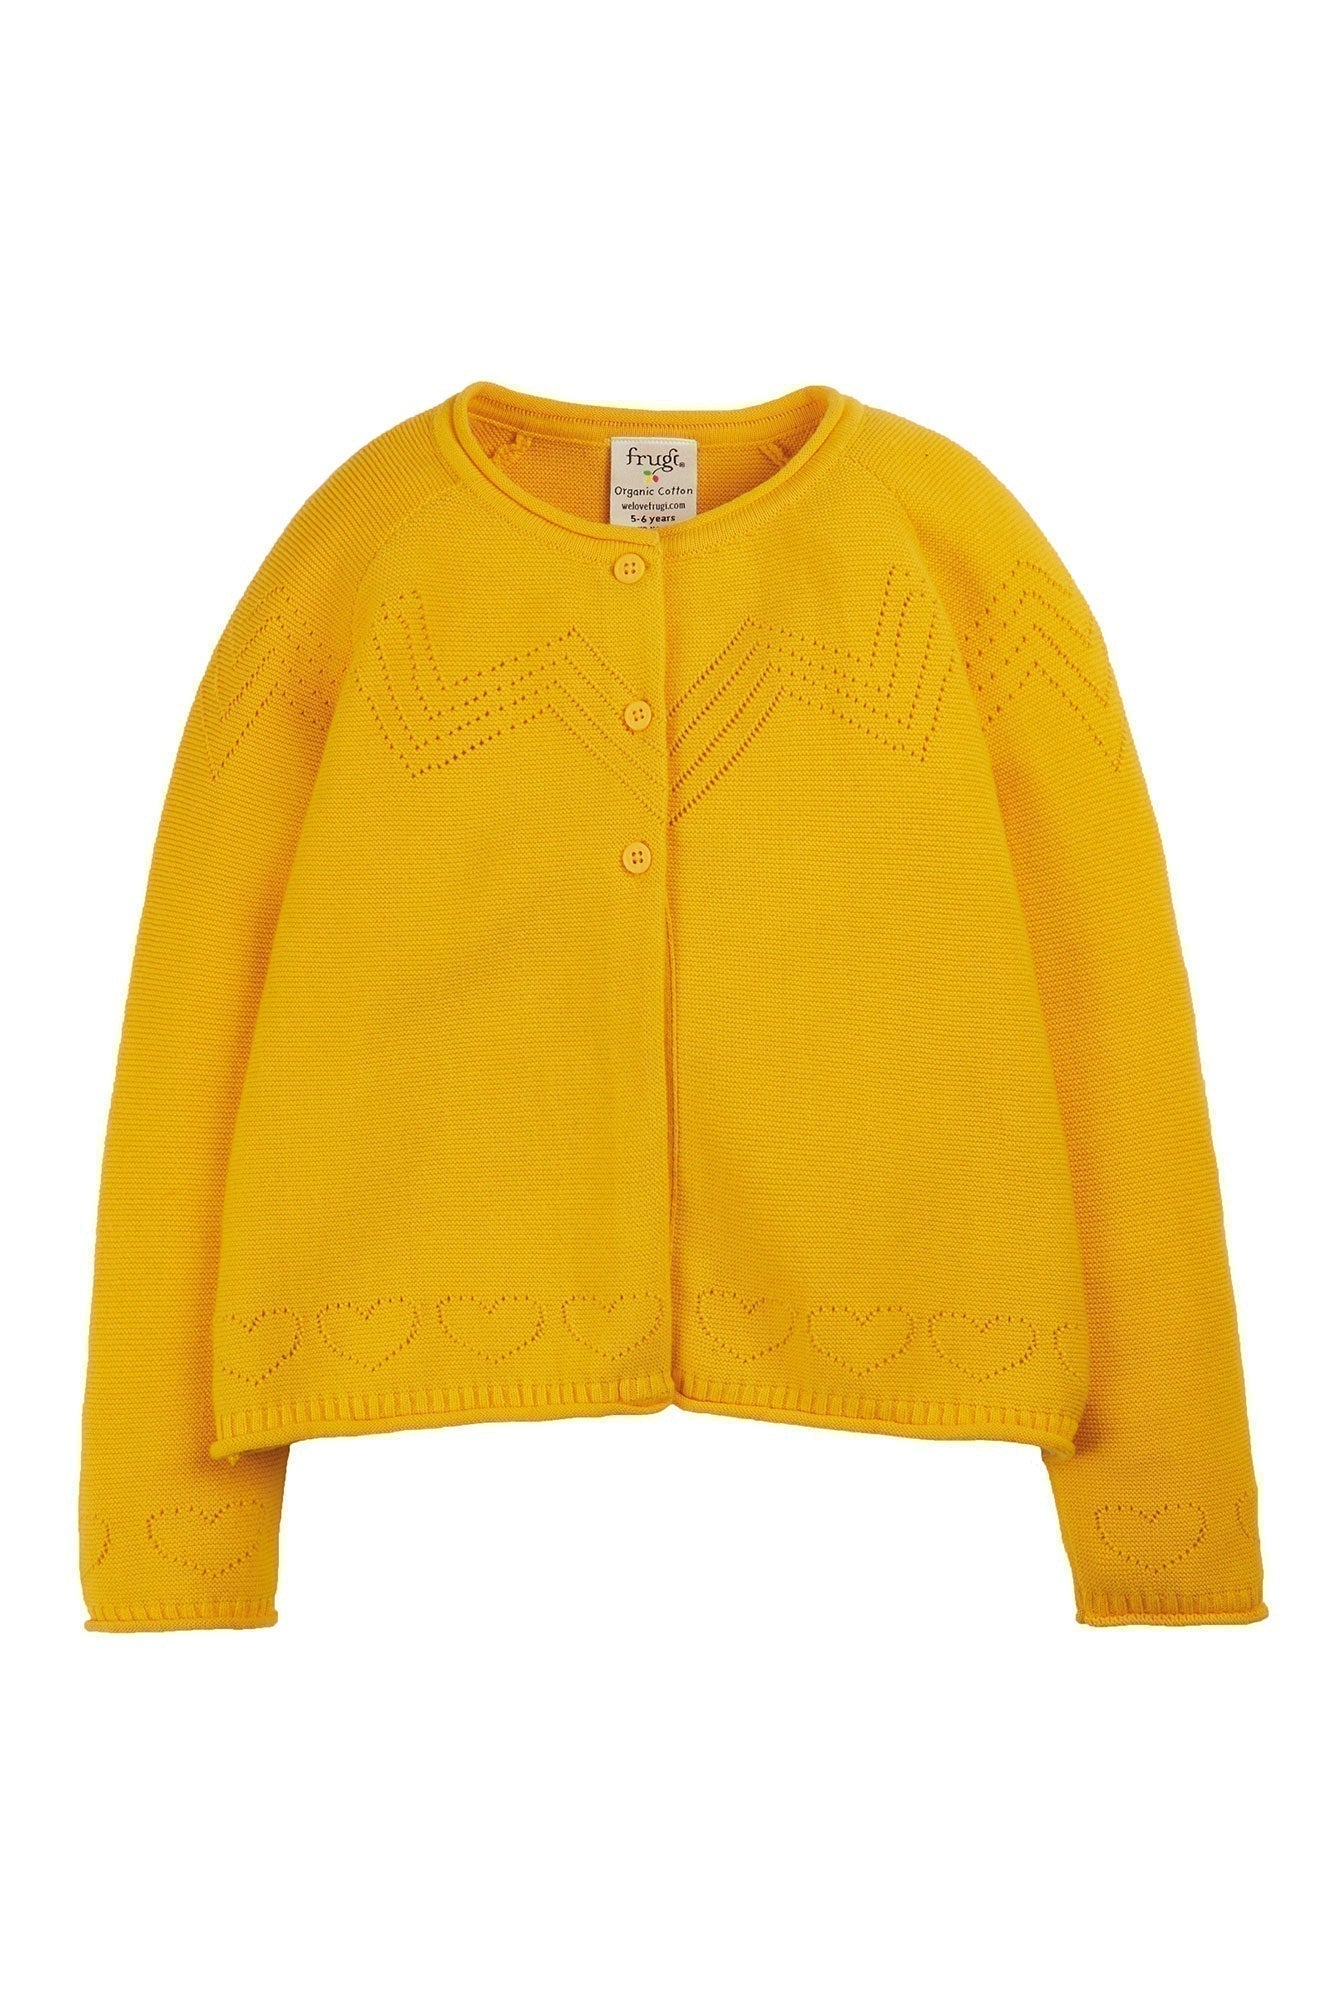 Frugi Piper Pointelle Cardigan - Bumblebee-Kids-Ohh! By Gum - Shop Sustainable